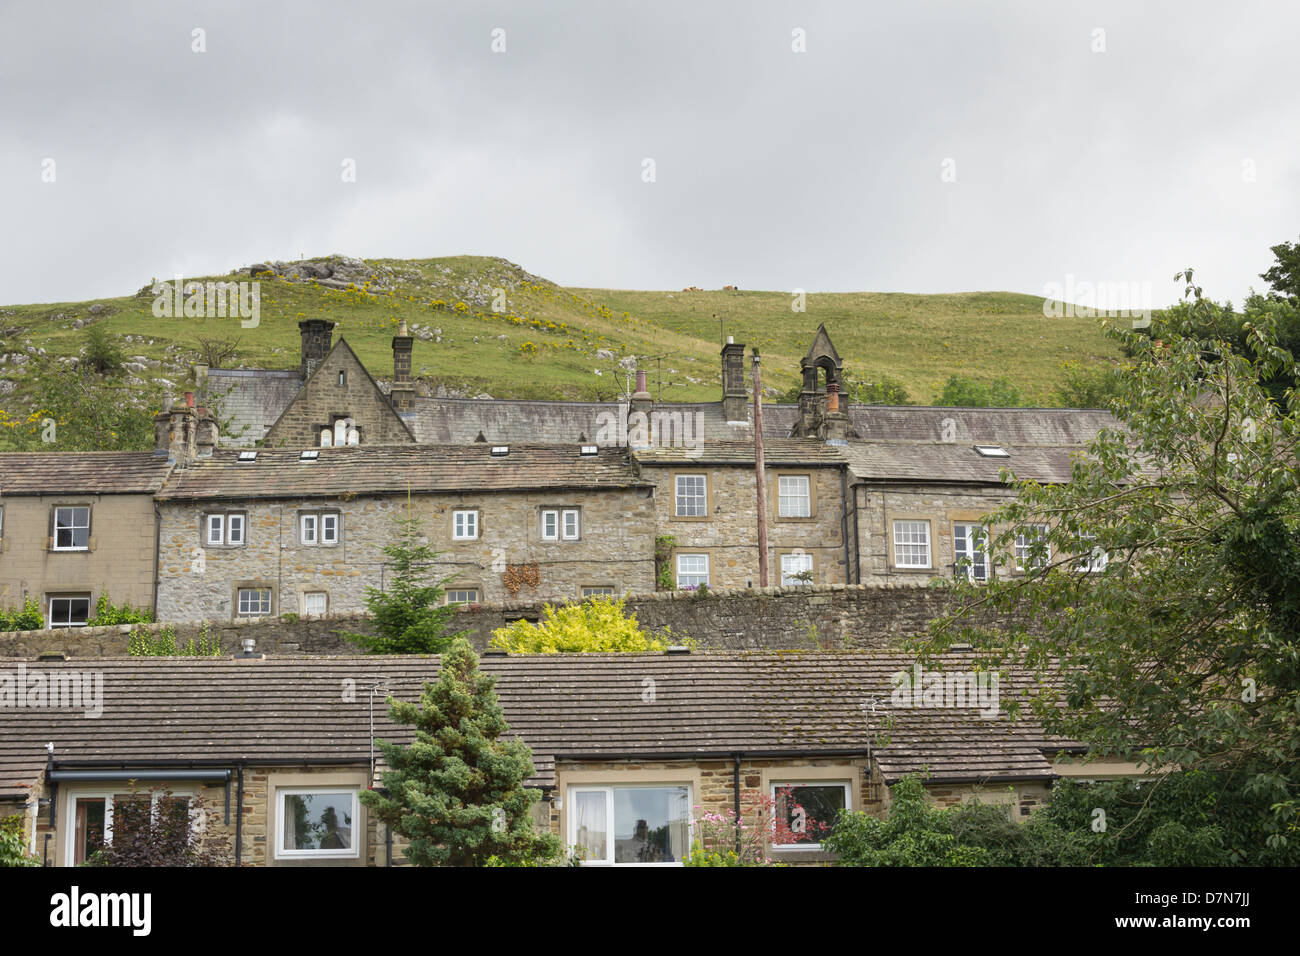 Stone-built houses and school of Settle, North Yorkshire, overlooked by hills of the north Yorkshire dales. Stock Photo